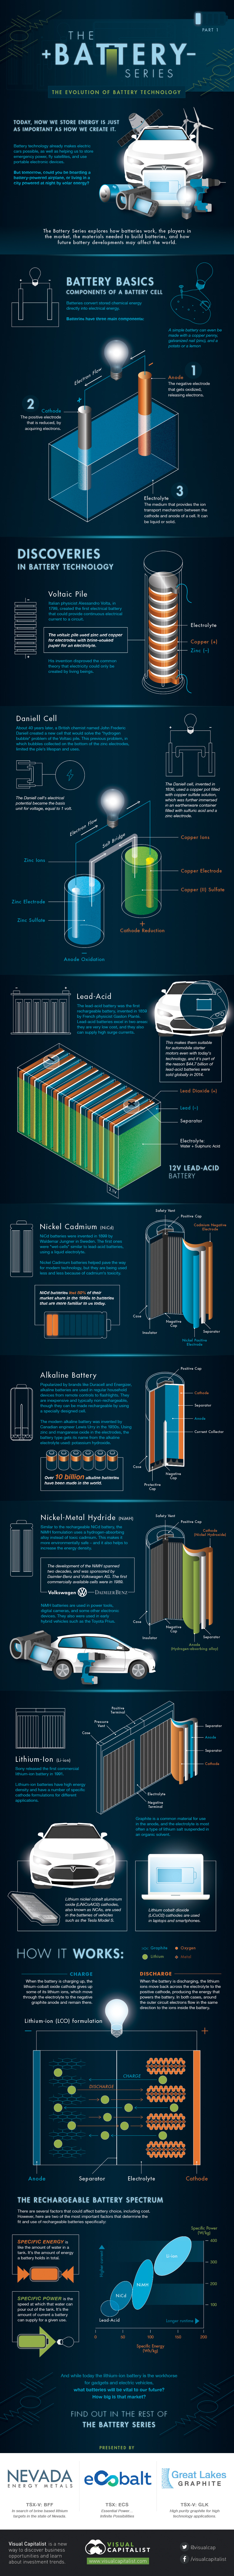 The Battery Series: The Evolution of Battery Technology